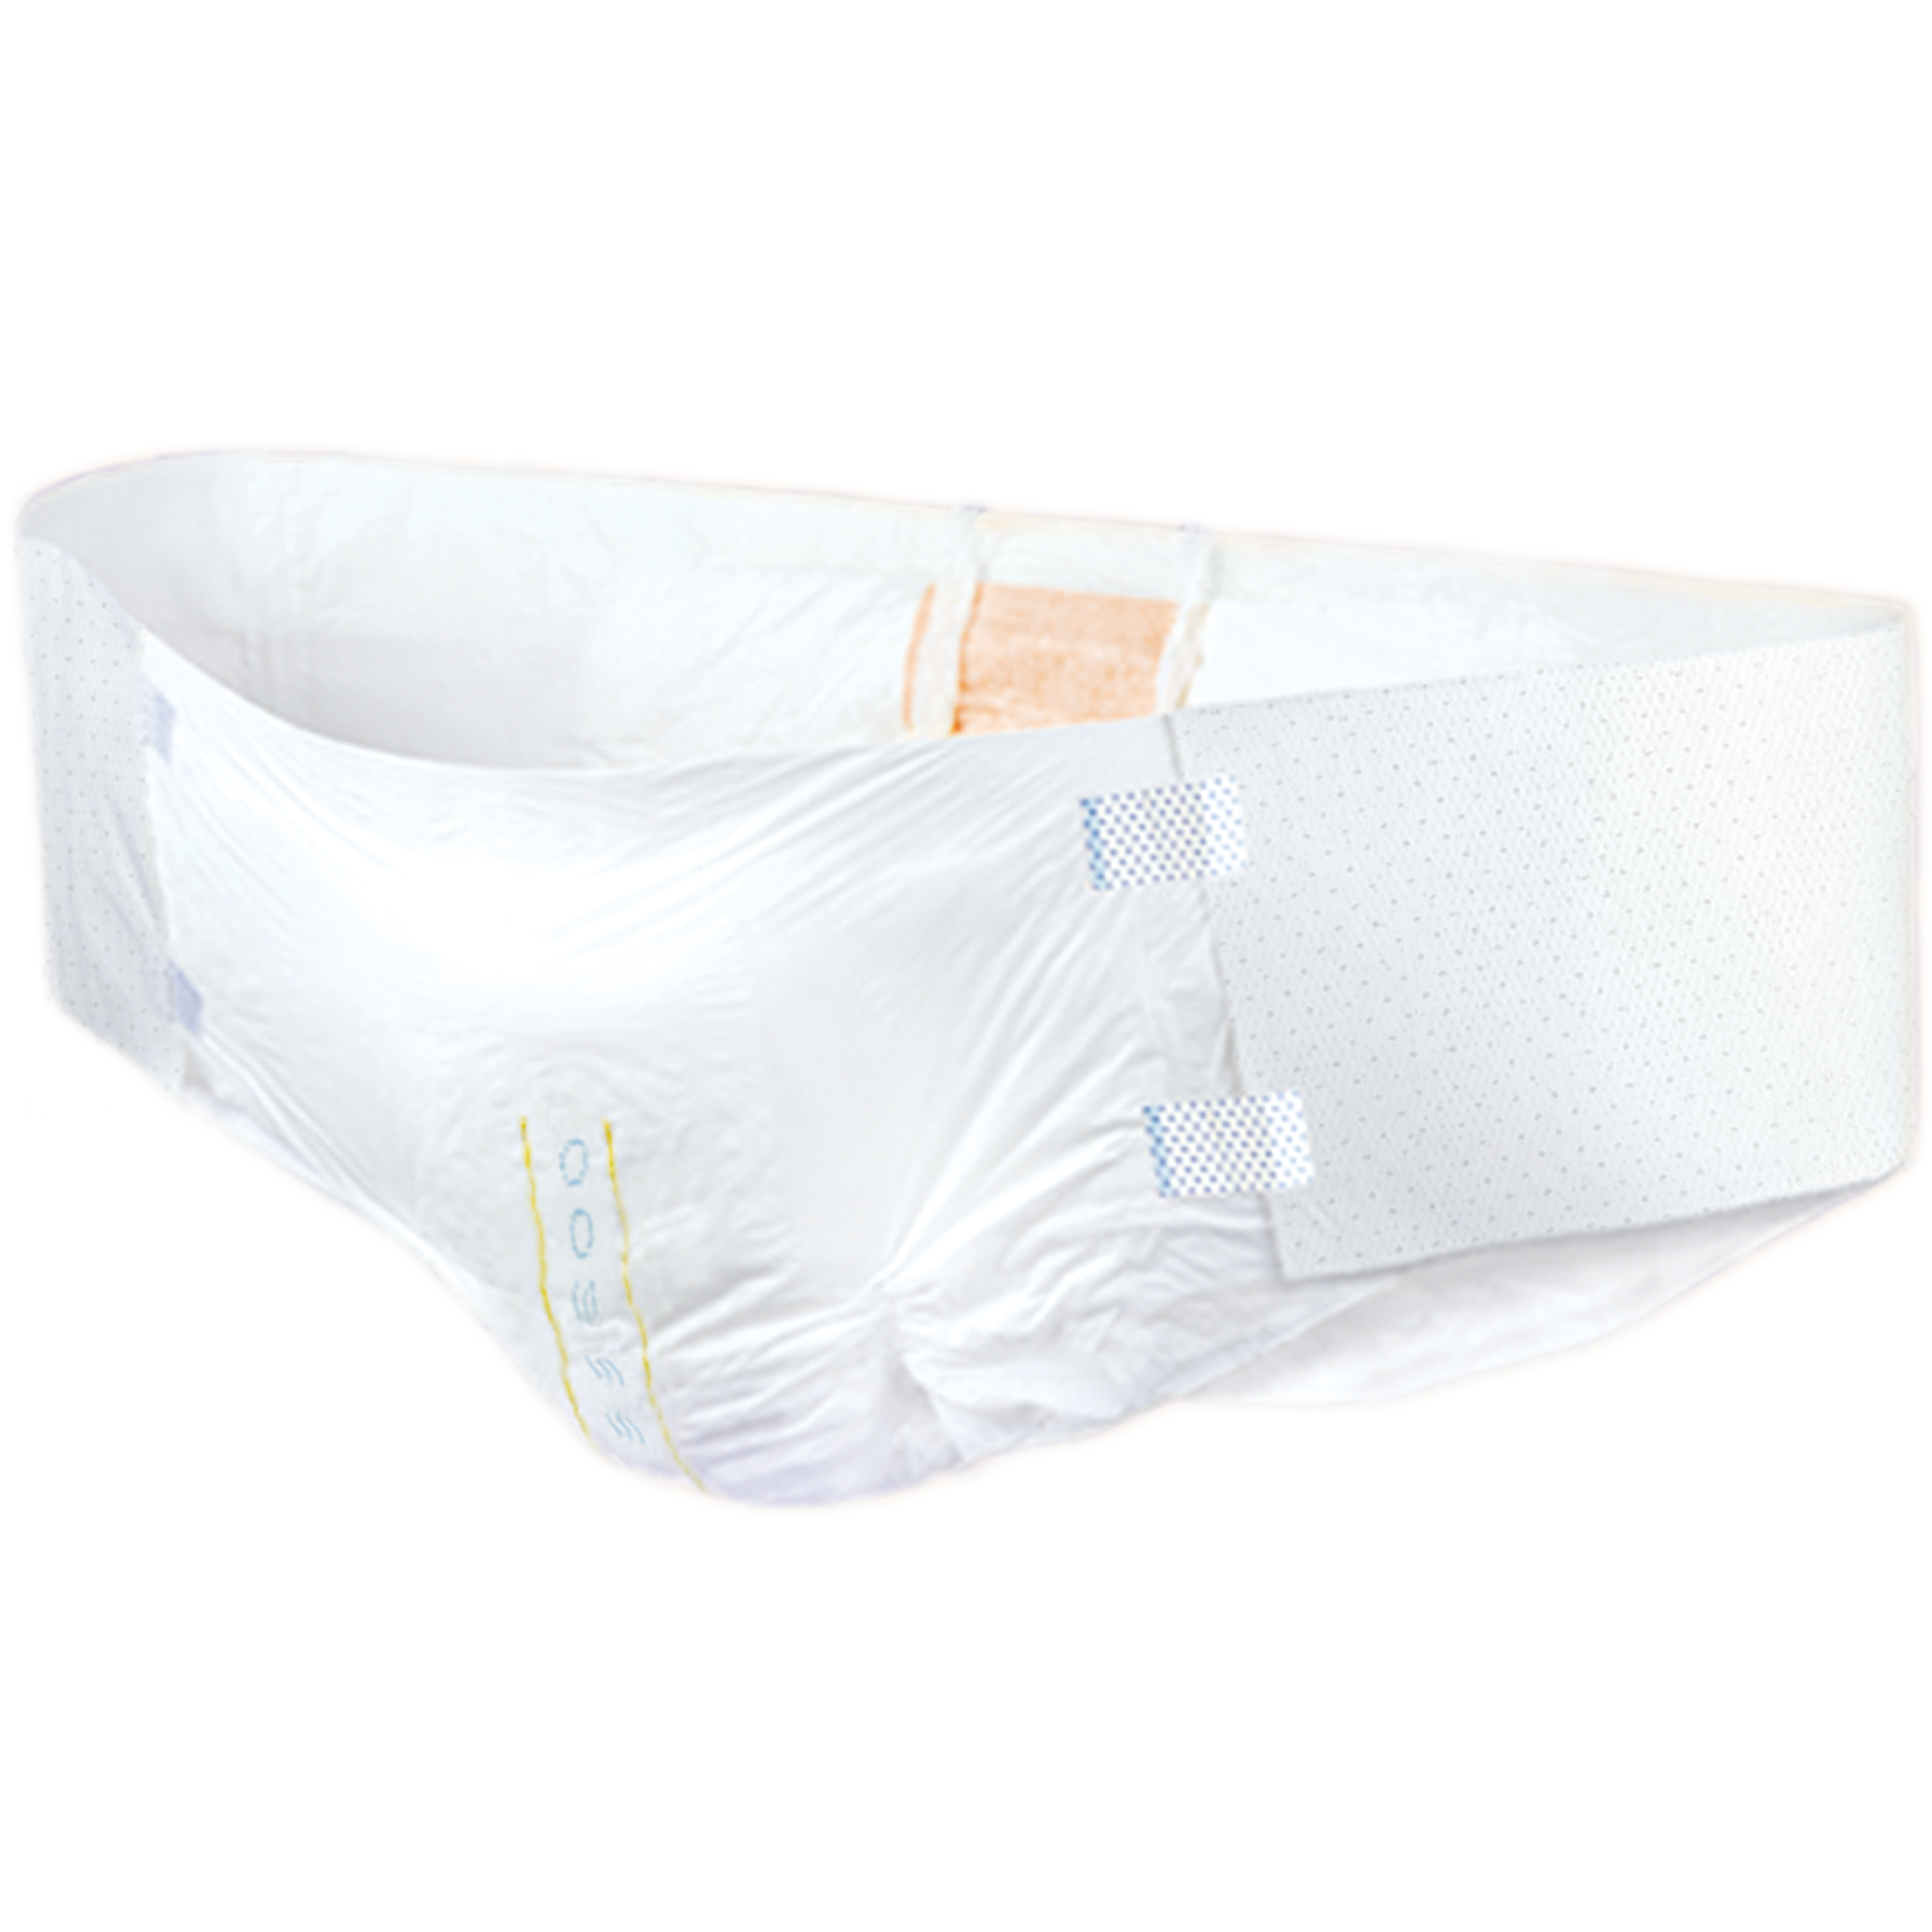 Tranquility Briefs & Adult Diapers with Tabs - Tranquility Products